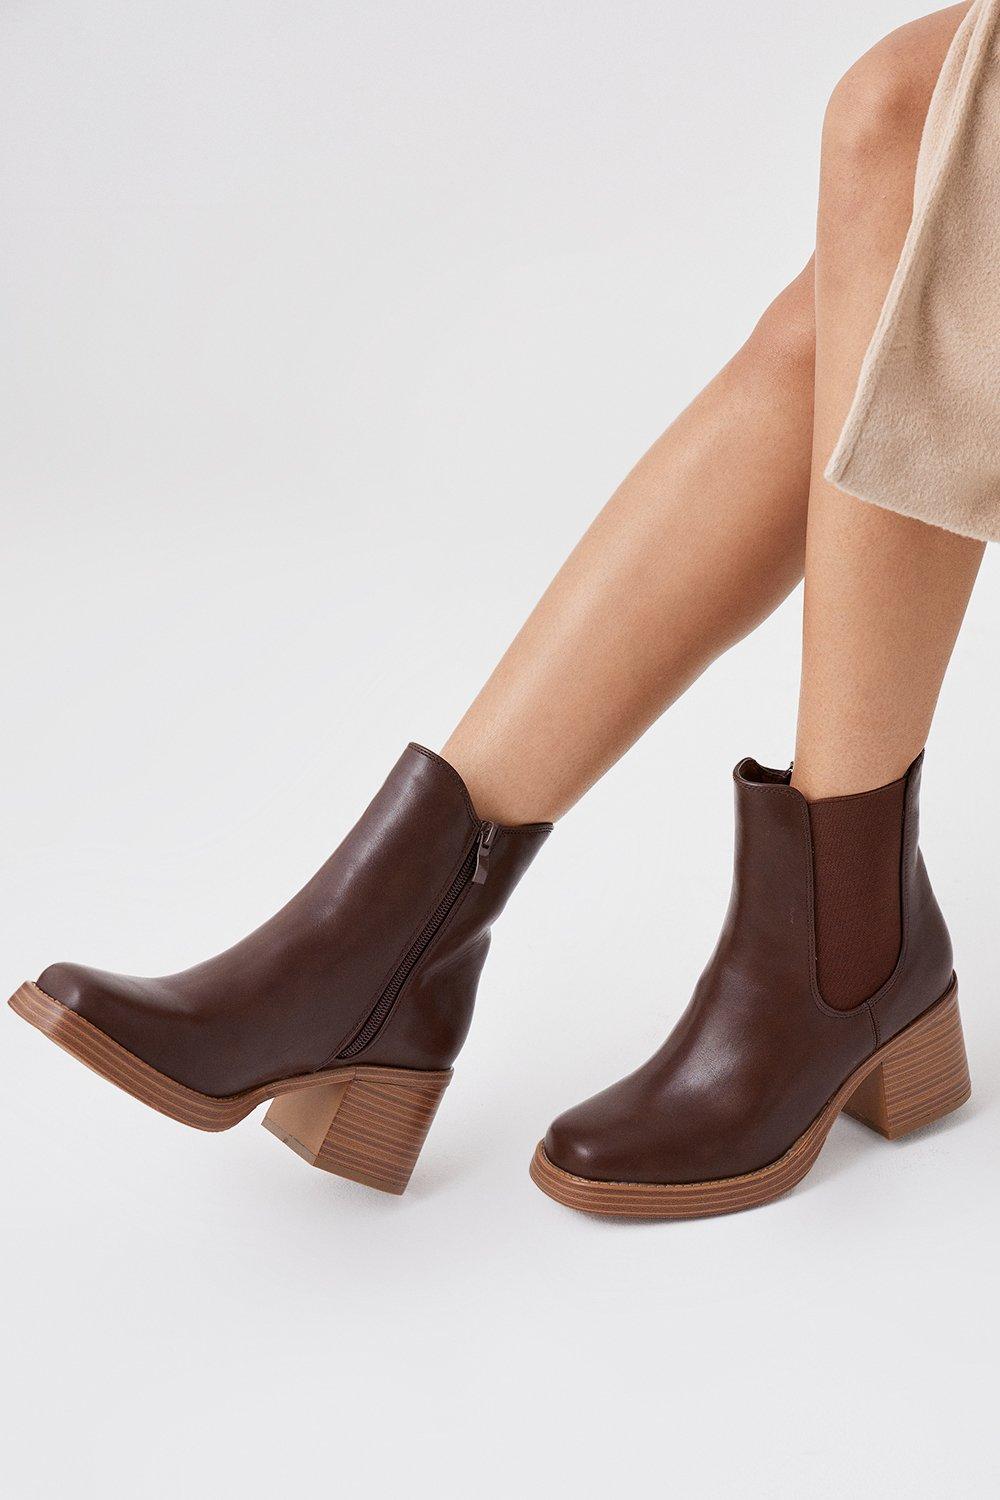 Women’s Faith: Alberta Square Toe Stack Heel Ankle Boots - brown - 6